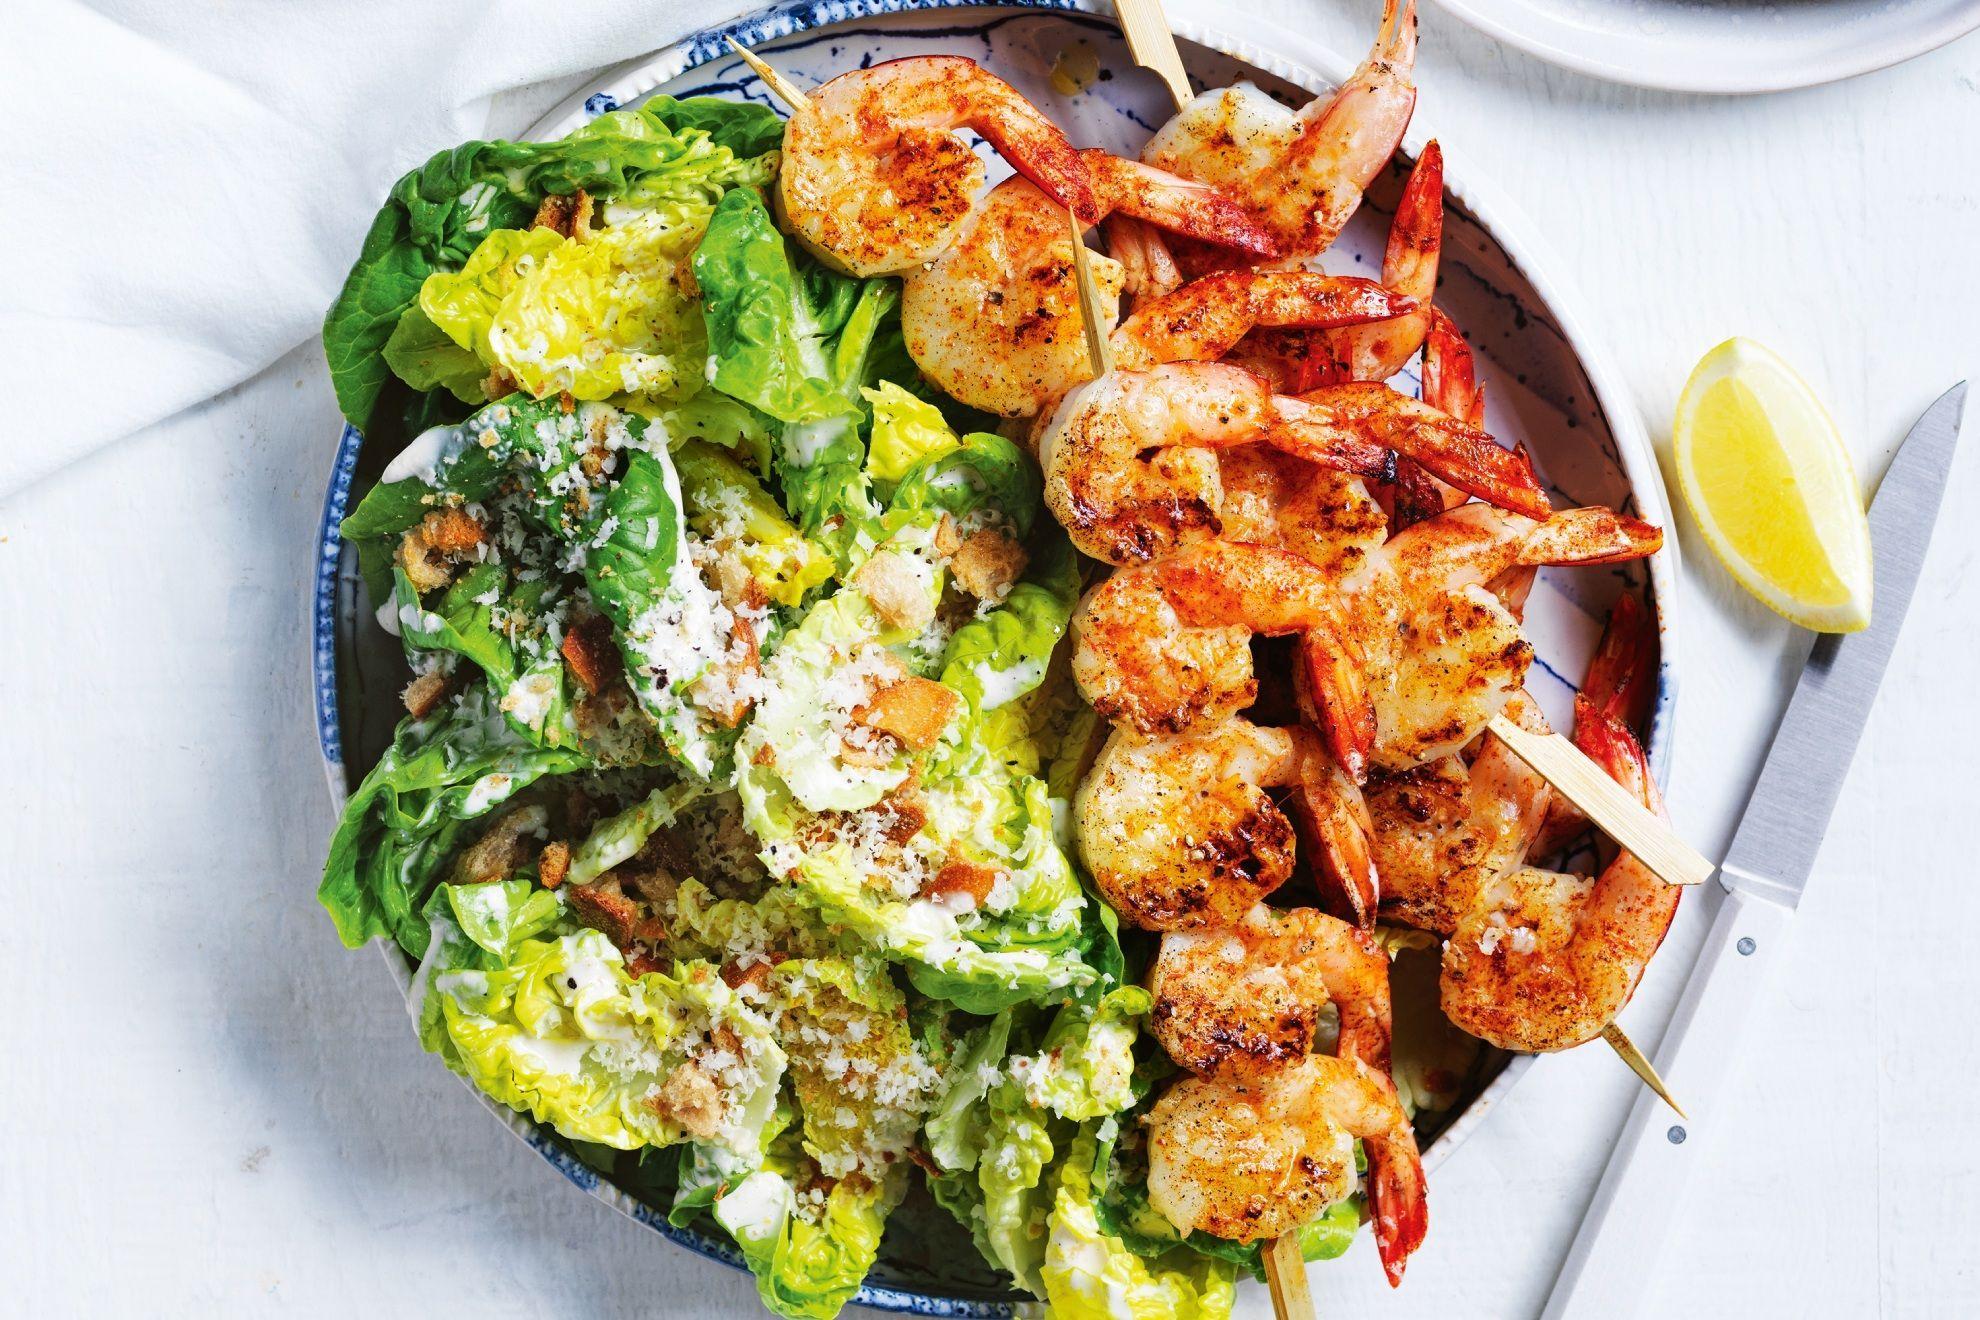 Caesar Salad with Blackened Grilled Shrimp and Homemade Garlic Croutons